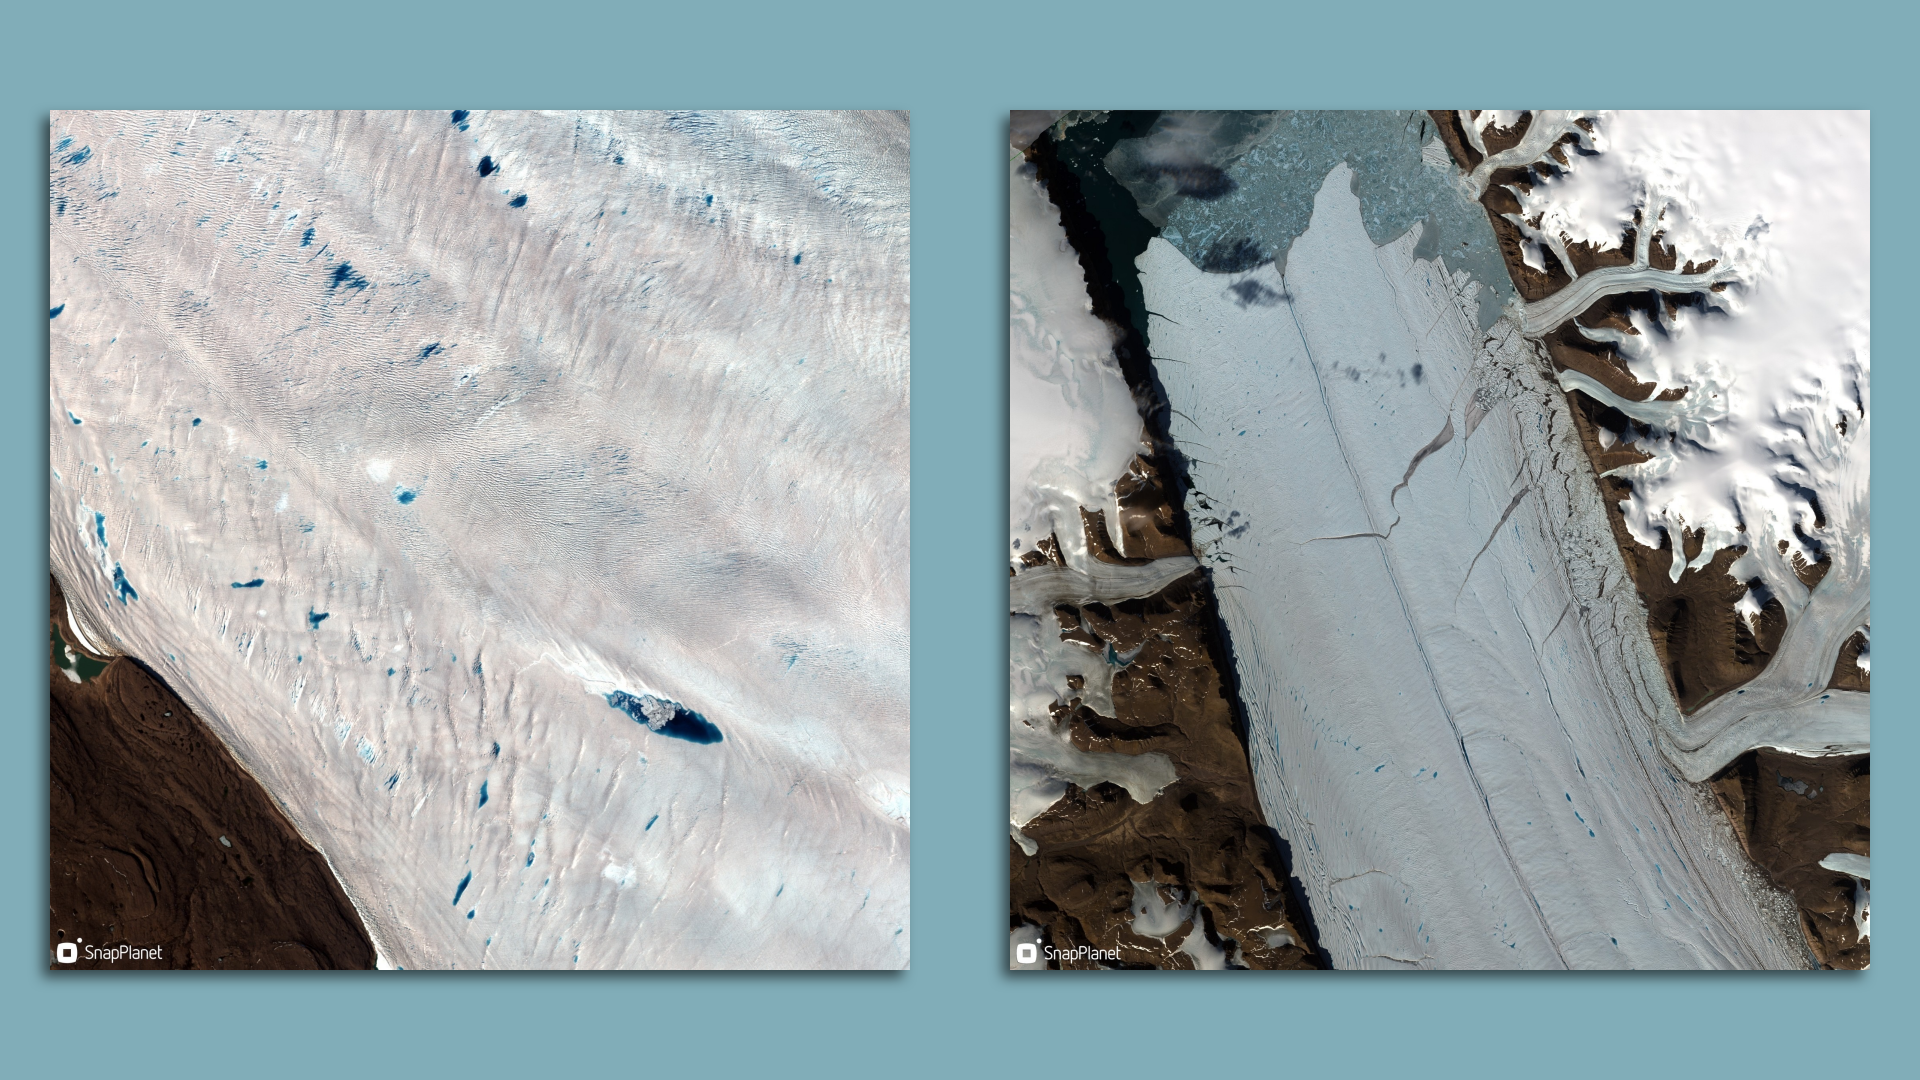 Satellite image of meltwater on the Greenland Ice Sheet.